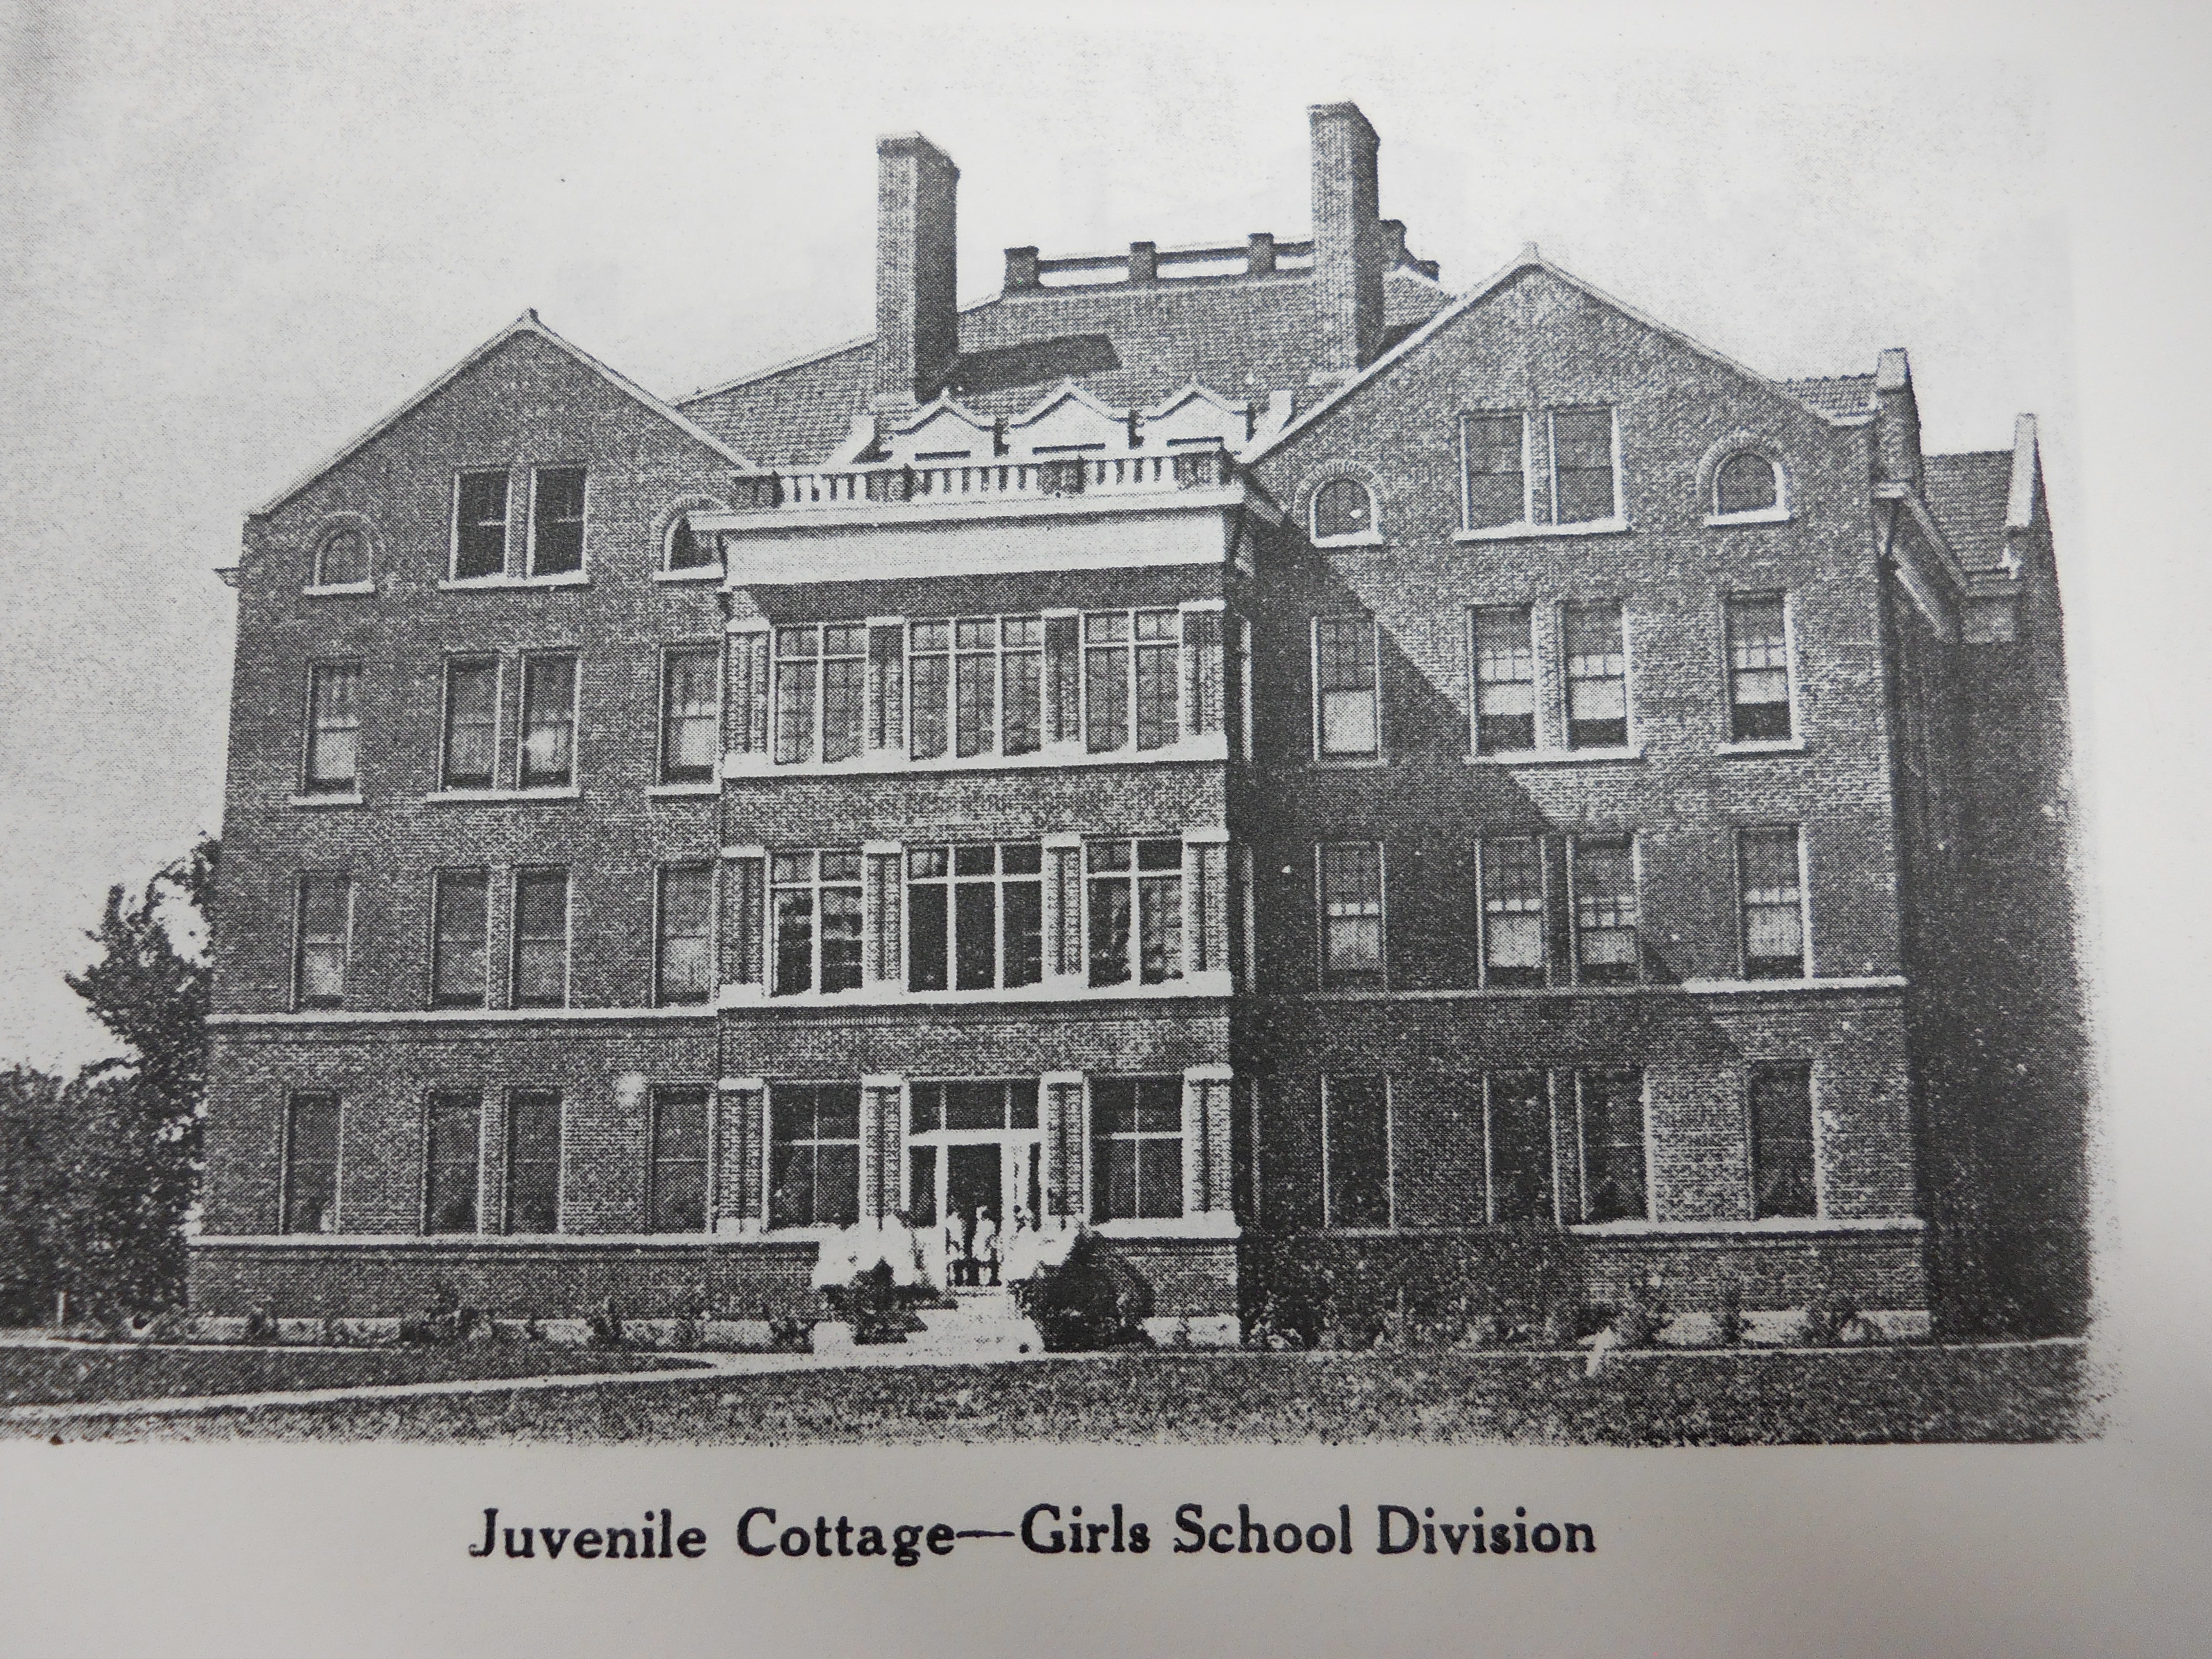 Juvenile Girls Cottage 1919.  Currently the Central Office of Glenwood Community School District and Kids Place Daycare.  Courtesy of Glenwood Public Library.